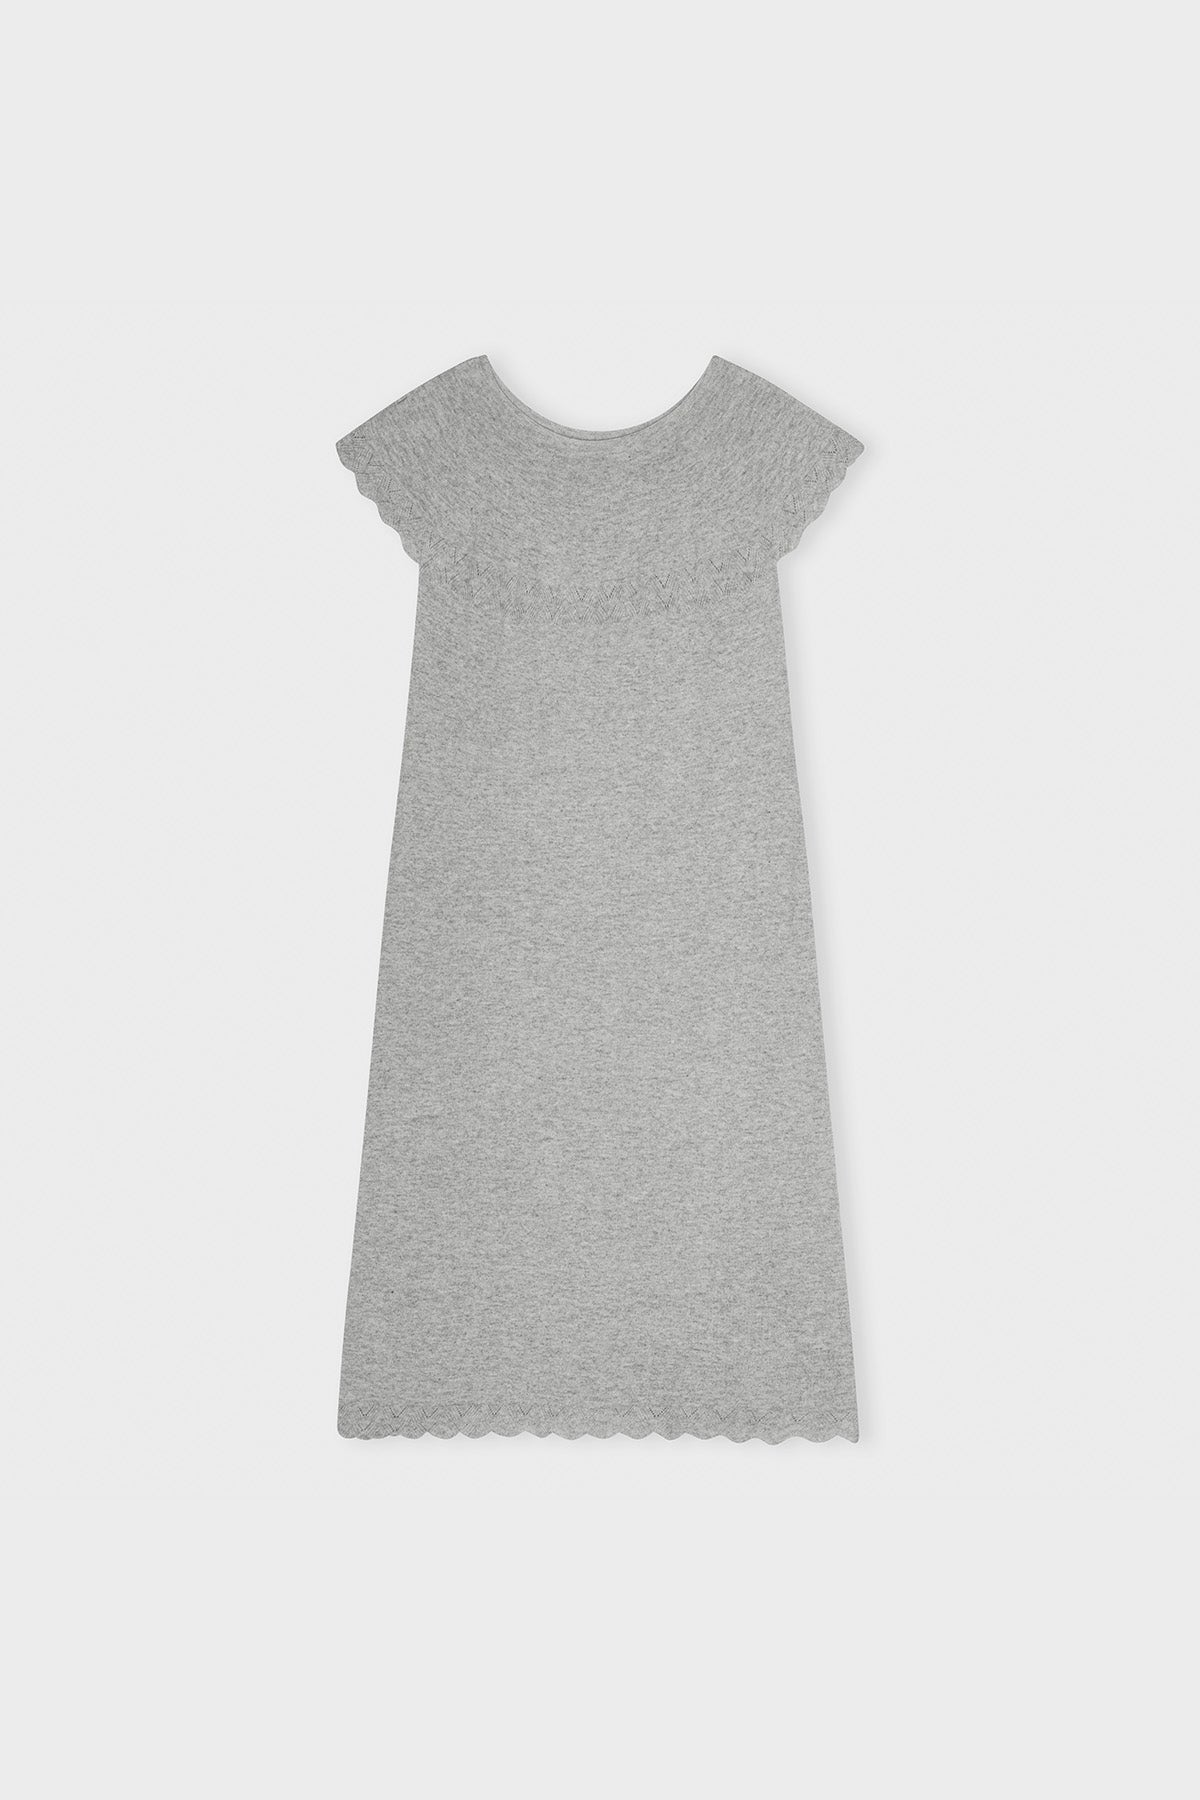 CARE BY ME 100% Cashmere Womens Beatrice Dress